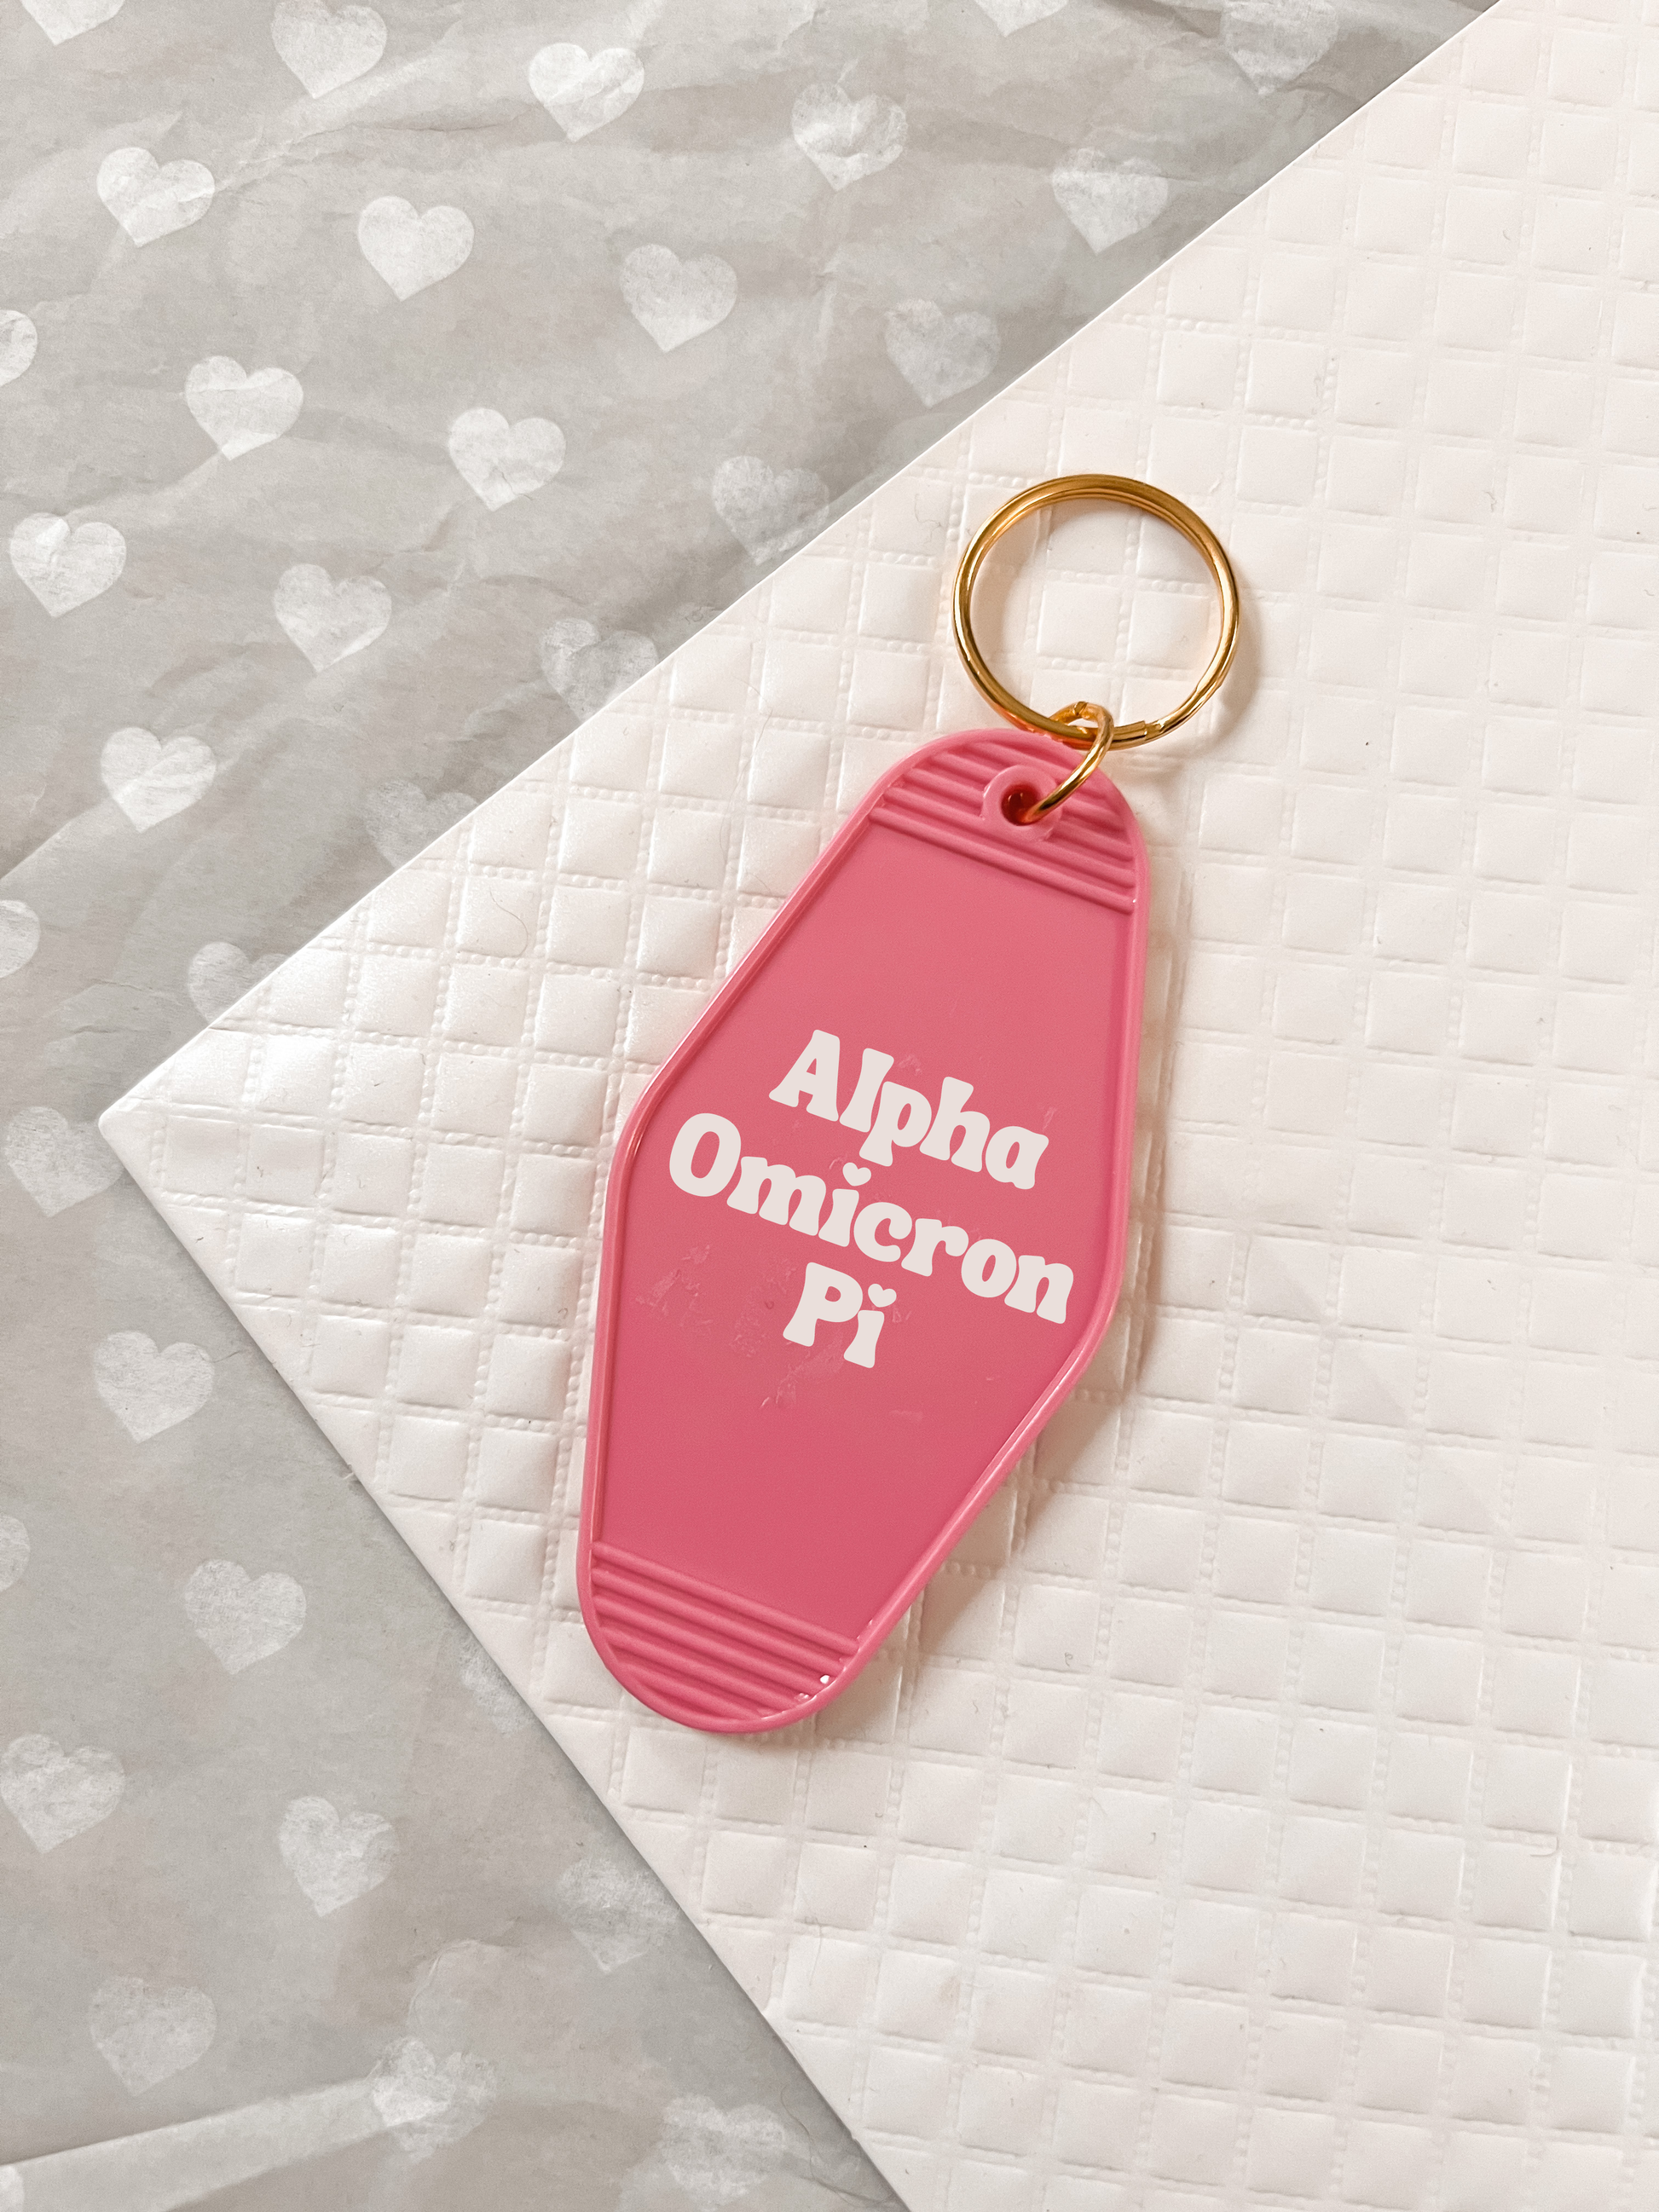 Alpha Omicron Pi Motel Hotel Key Chain in Hot pink with white letters and gold ring. AOII AOPI